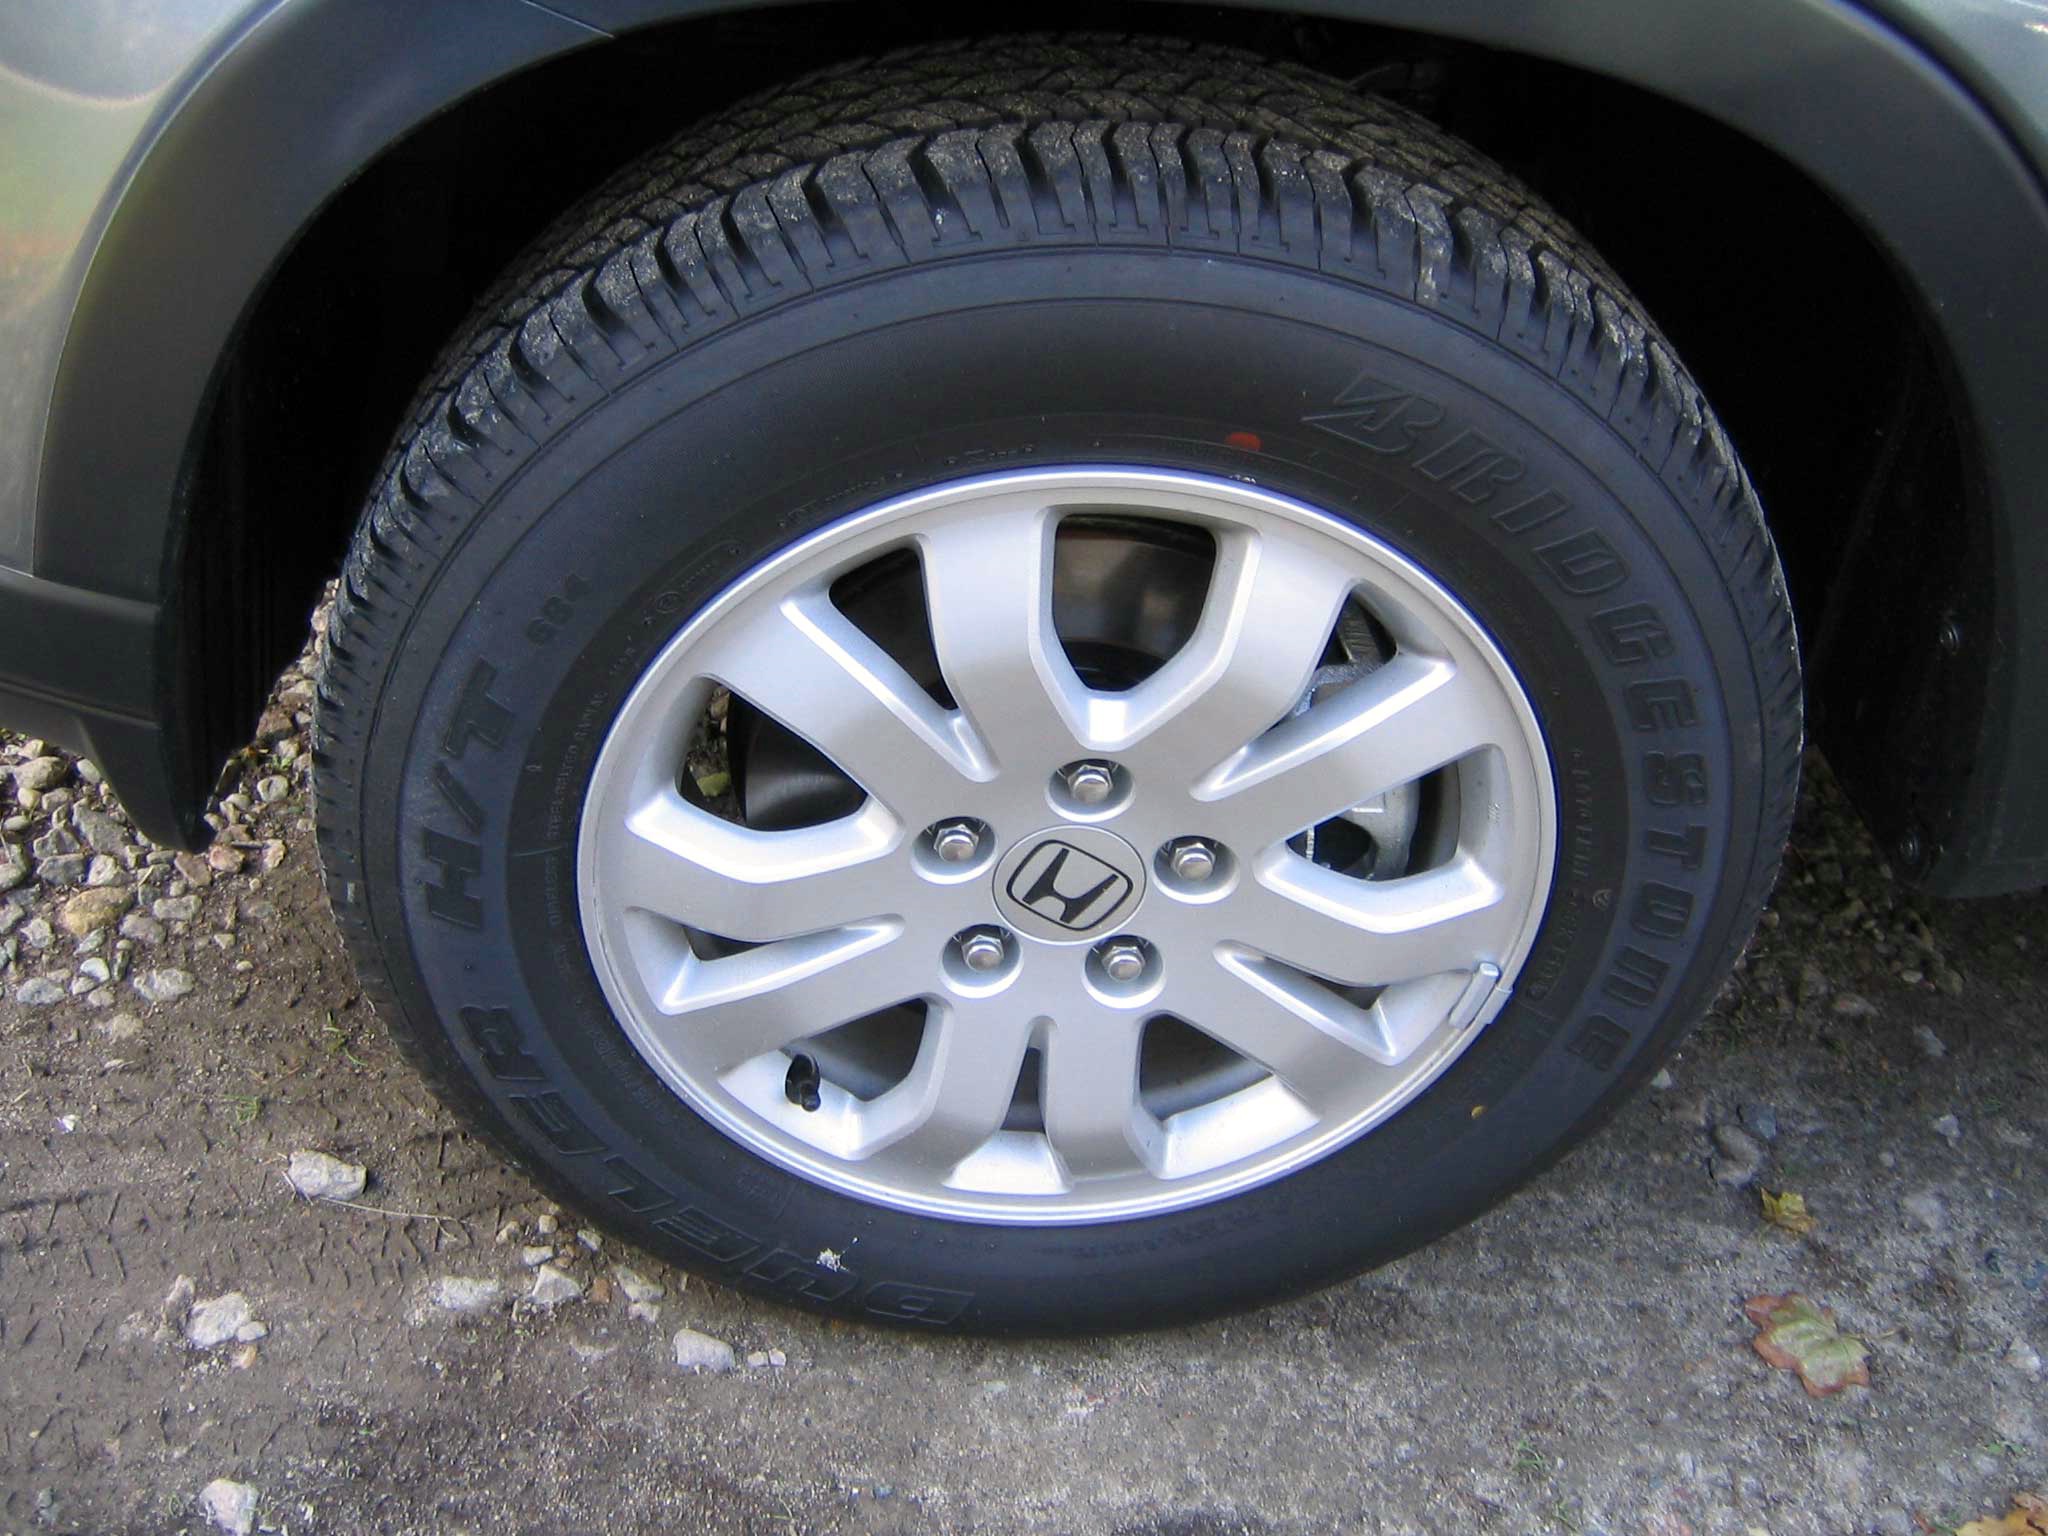 the front wheel of a car on gravel surface